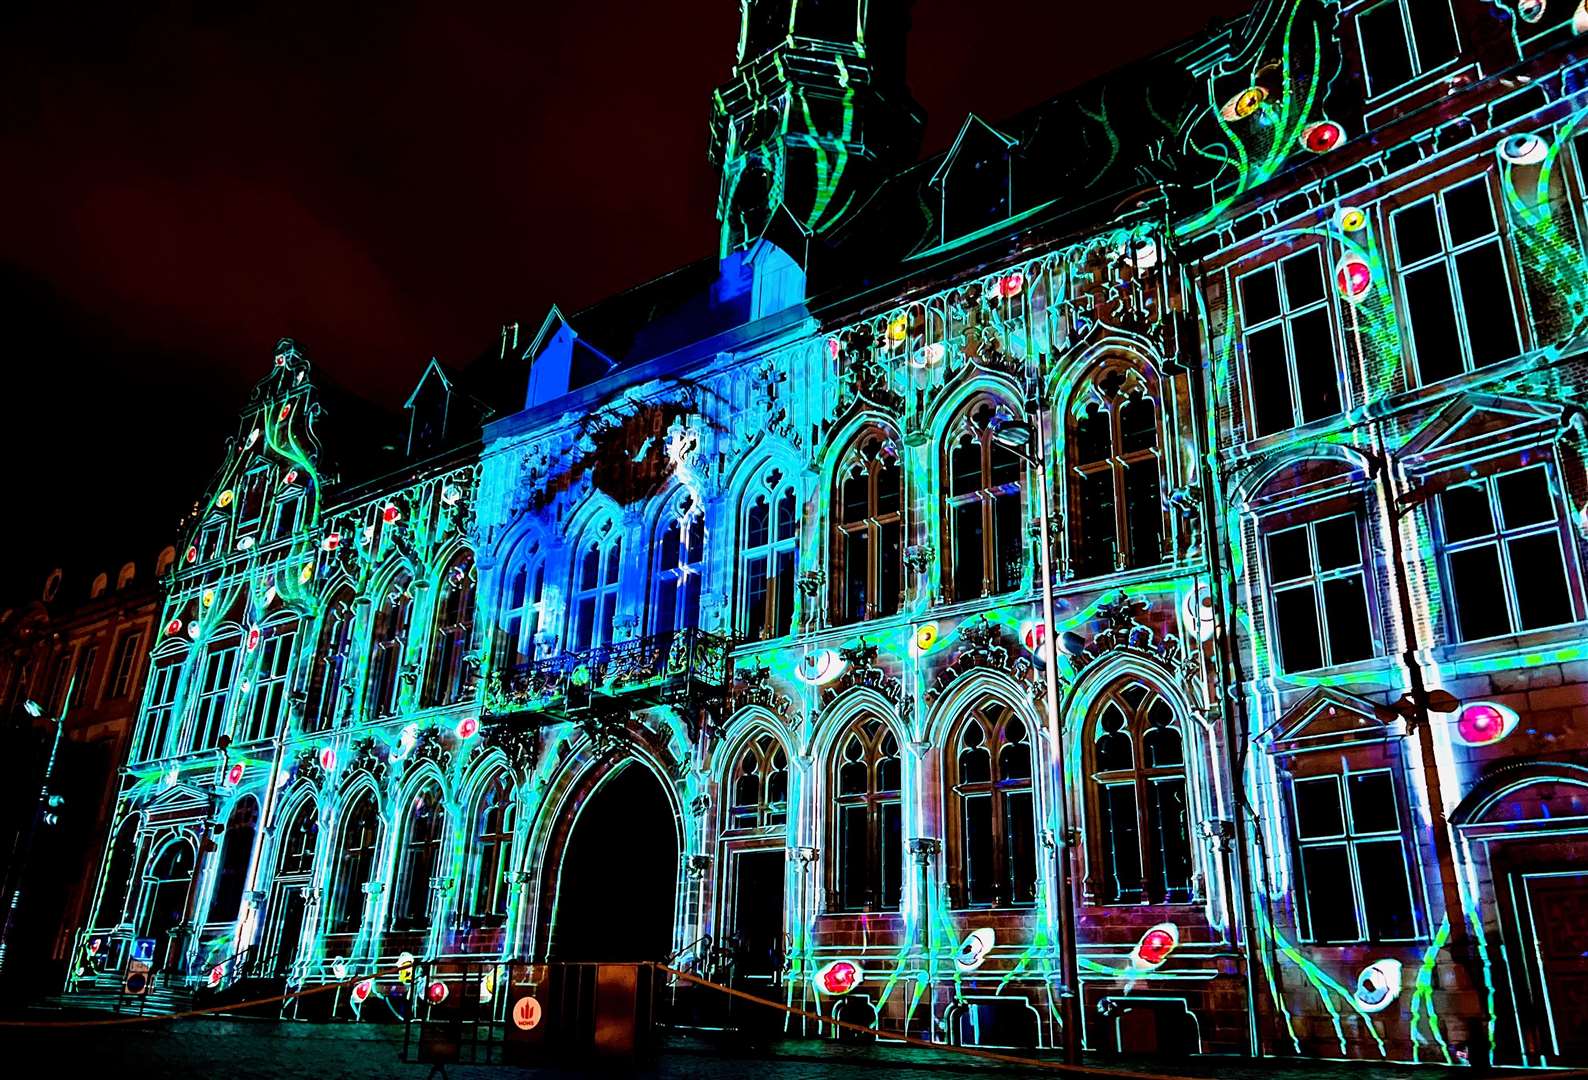 The medieval city is transformed by lights, effects and immersive art. Picture: Barry Goodwin